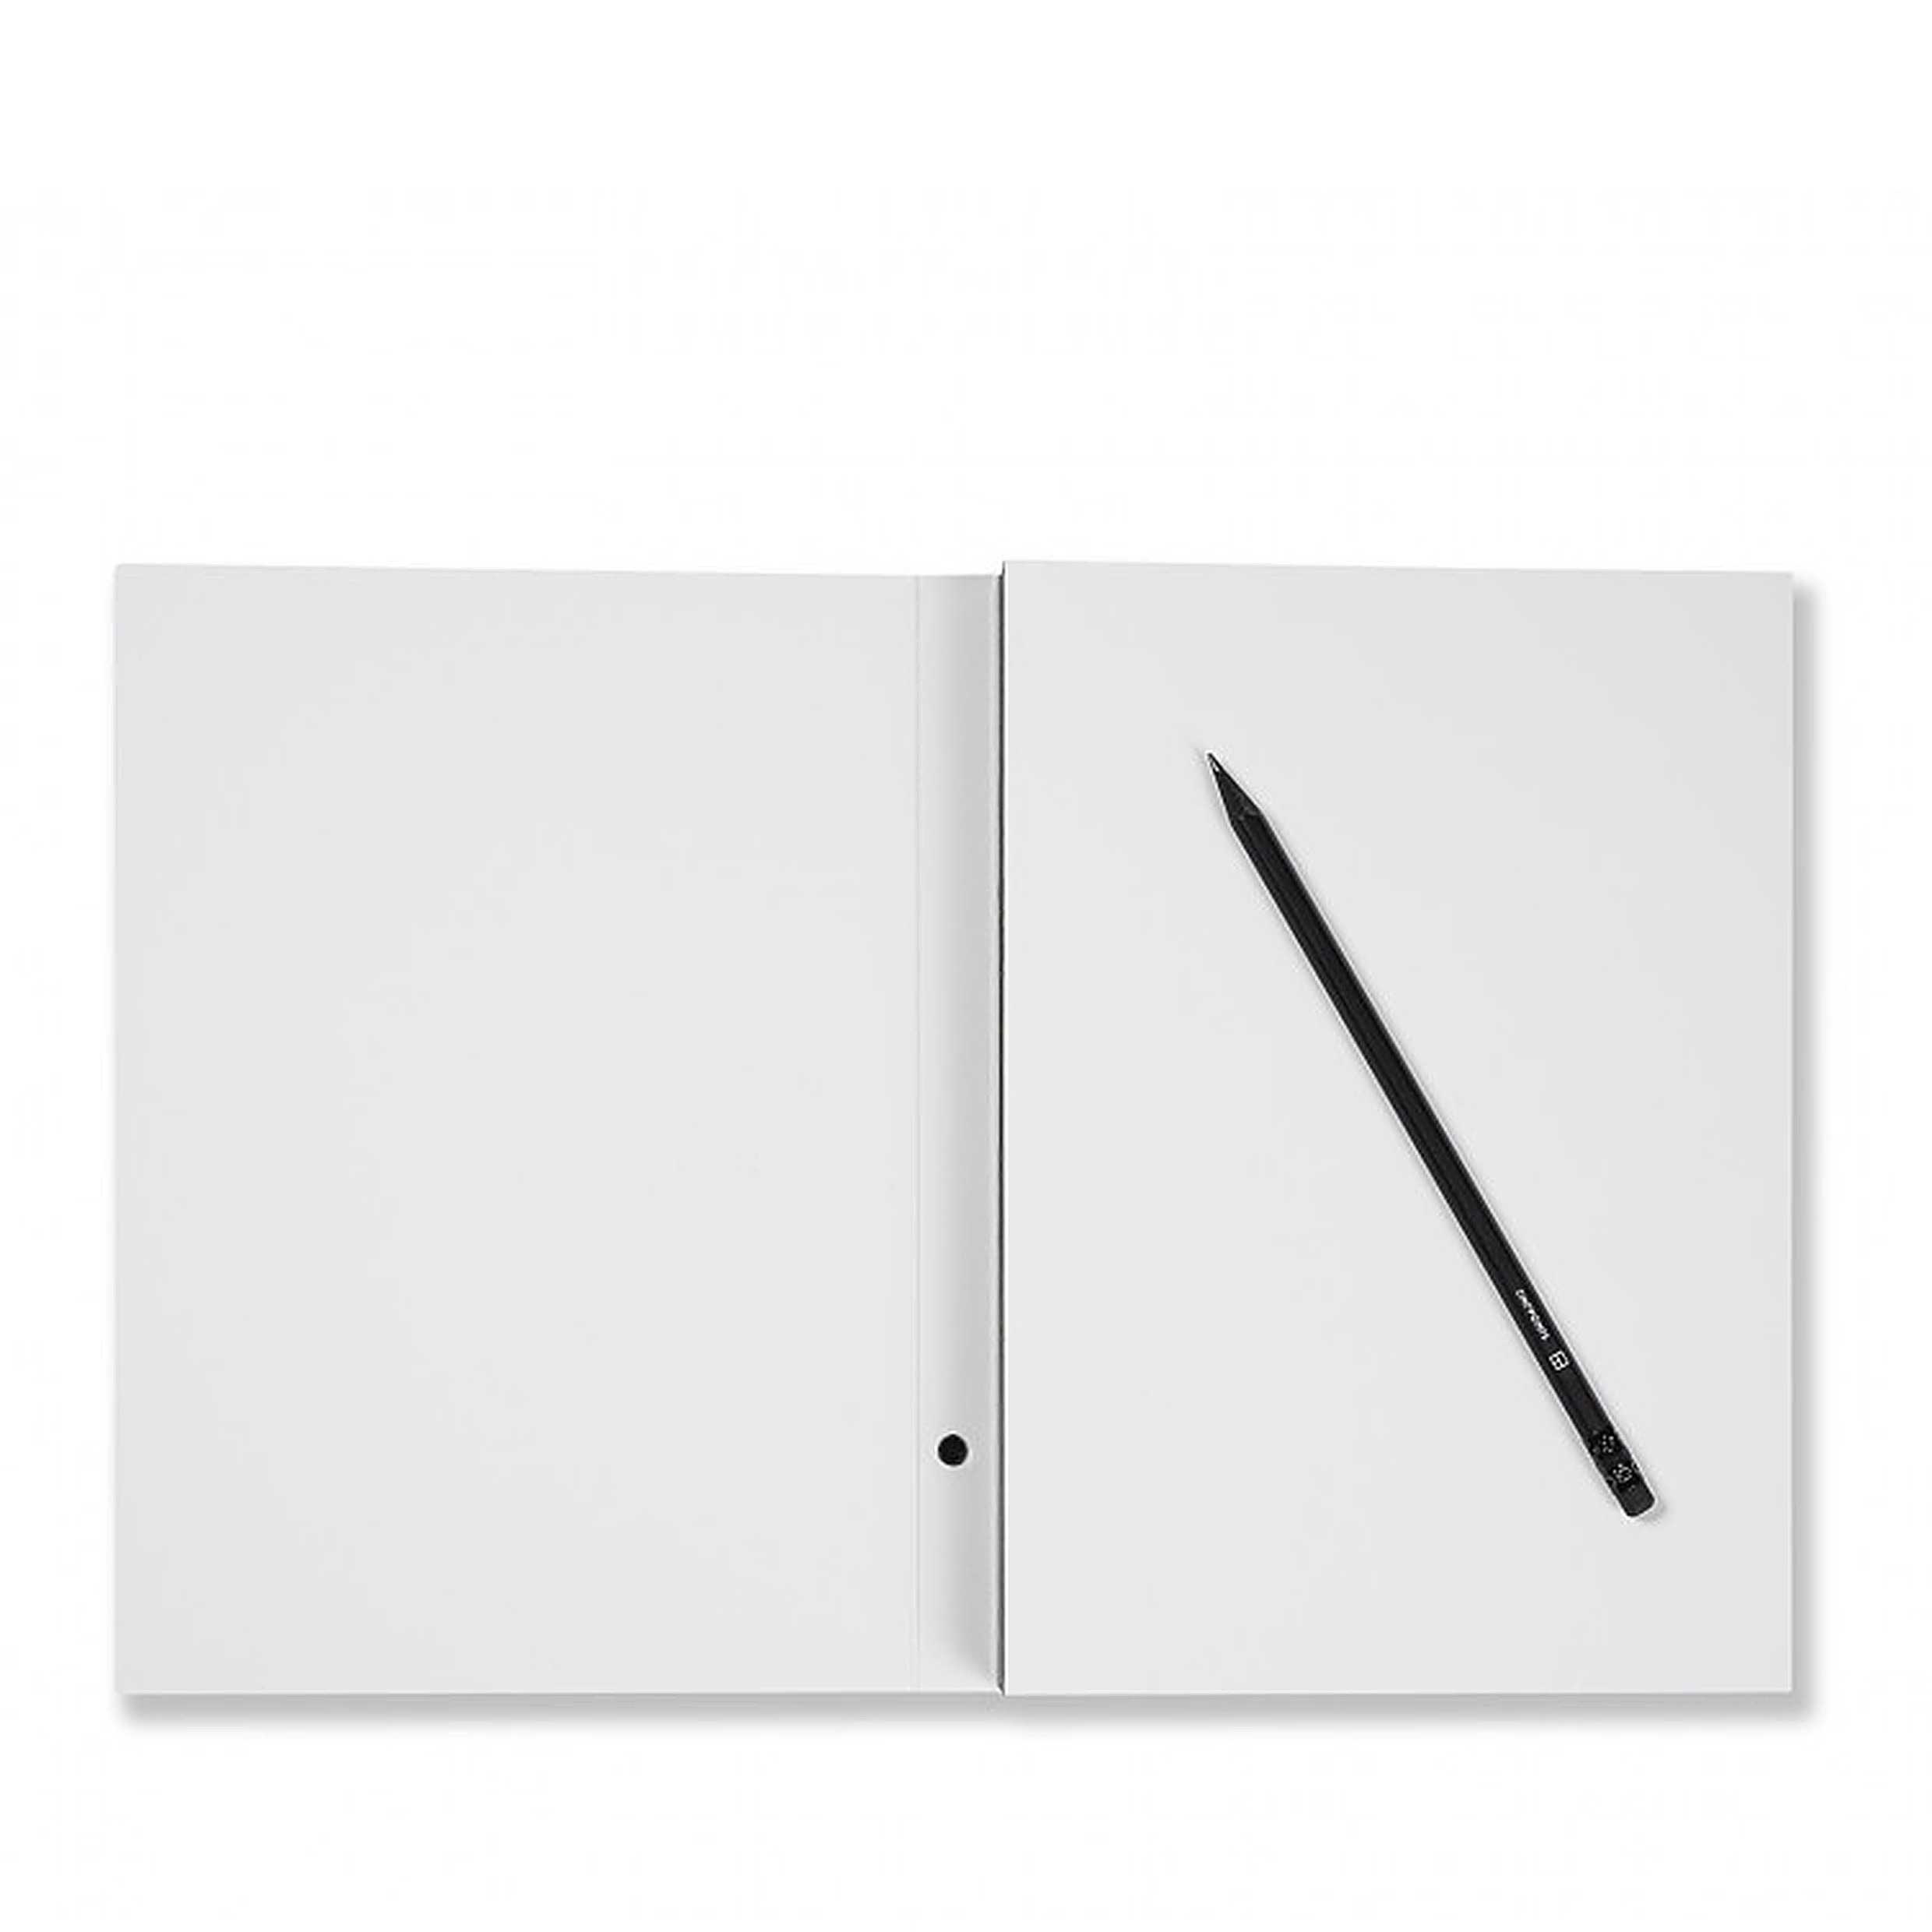 CINQPOINTS // ARCHIWHITE - WHITE MINIMALISTIC DRAWING BOOK | HB PENCIL